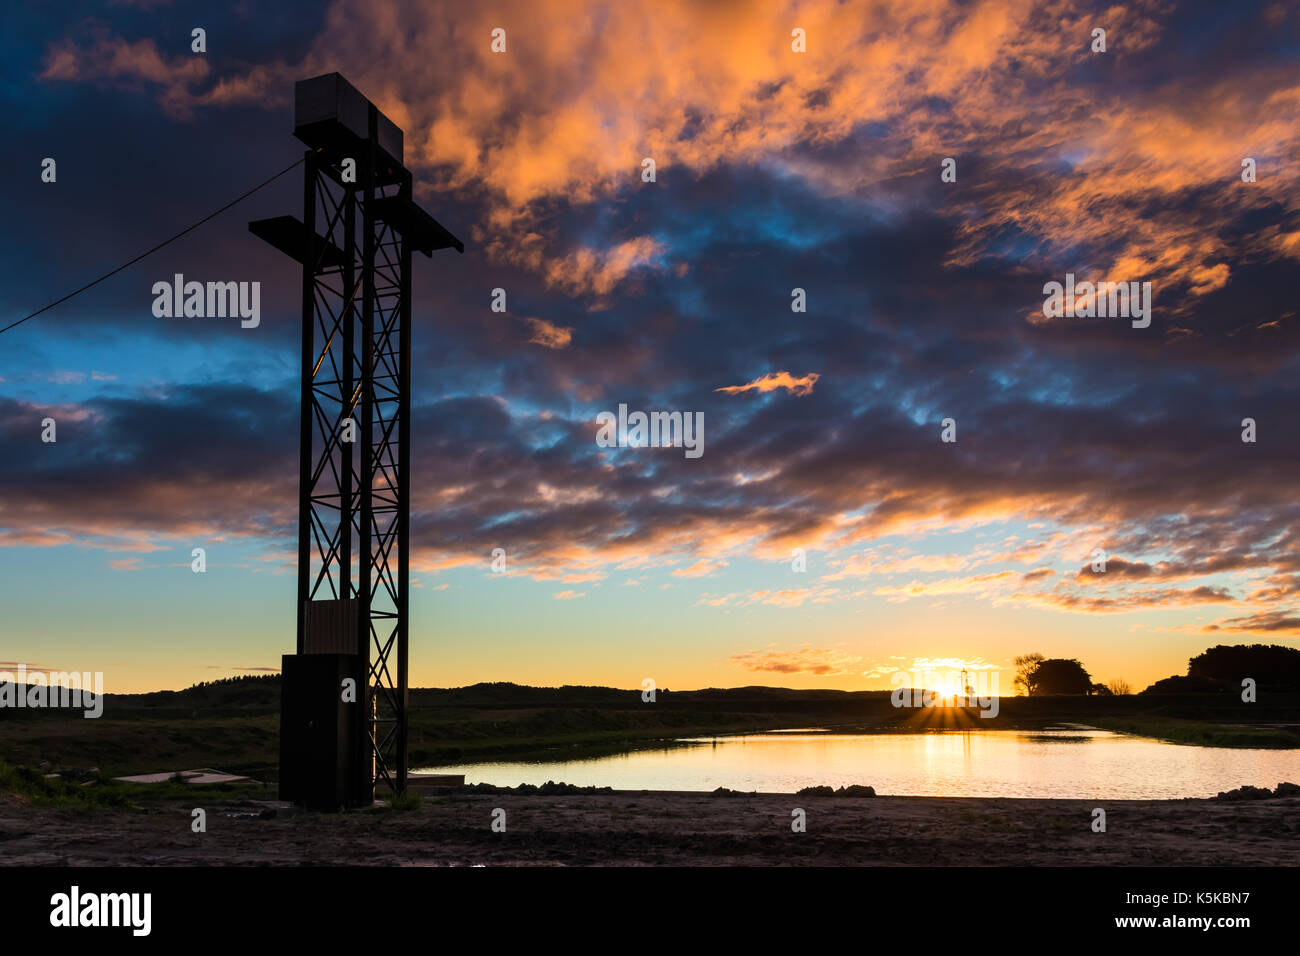 Foxton New Zealand new water park, showing it's new cable towers. With a wonderful sunset sky. Stock Photo